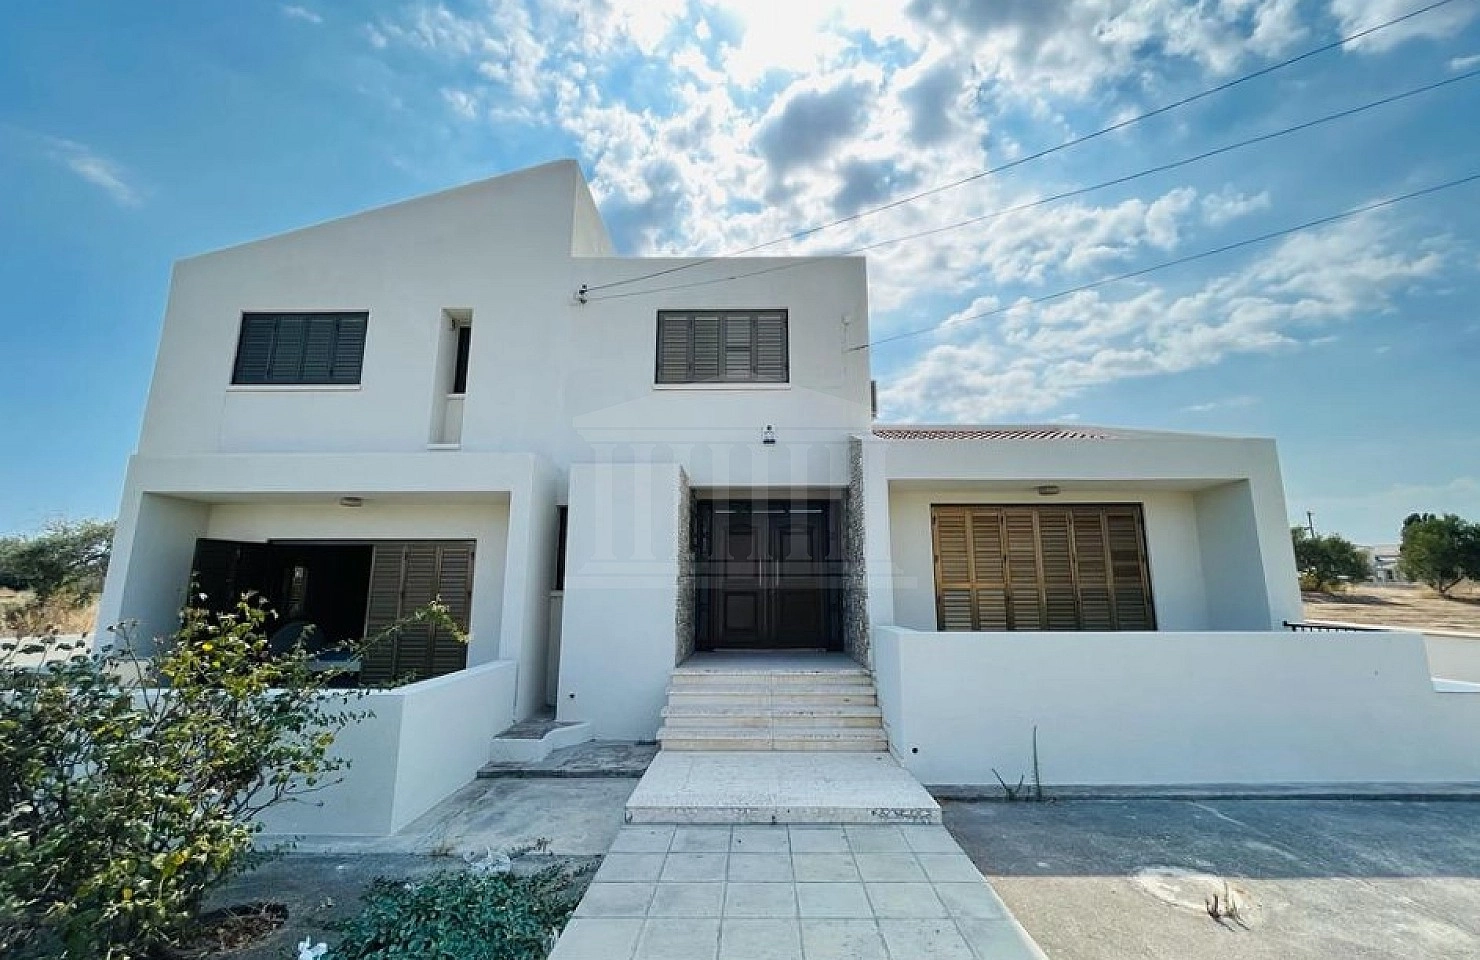 5 Bedroom House for Sale in Mazotos, Larnaca District